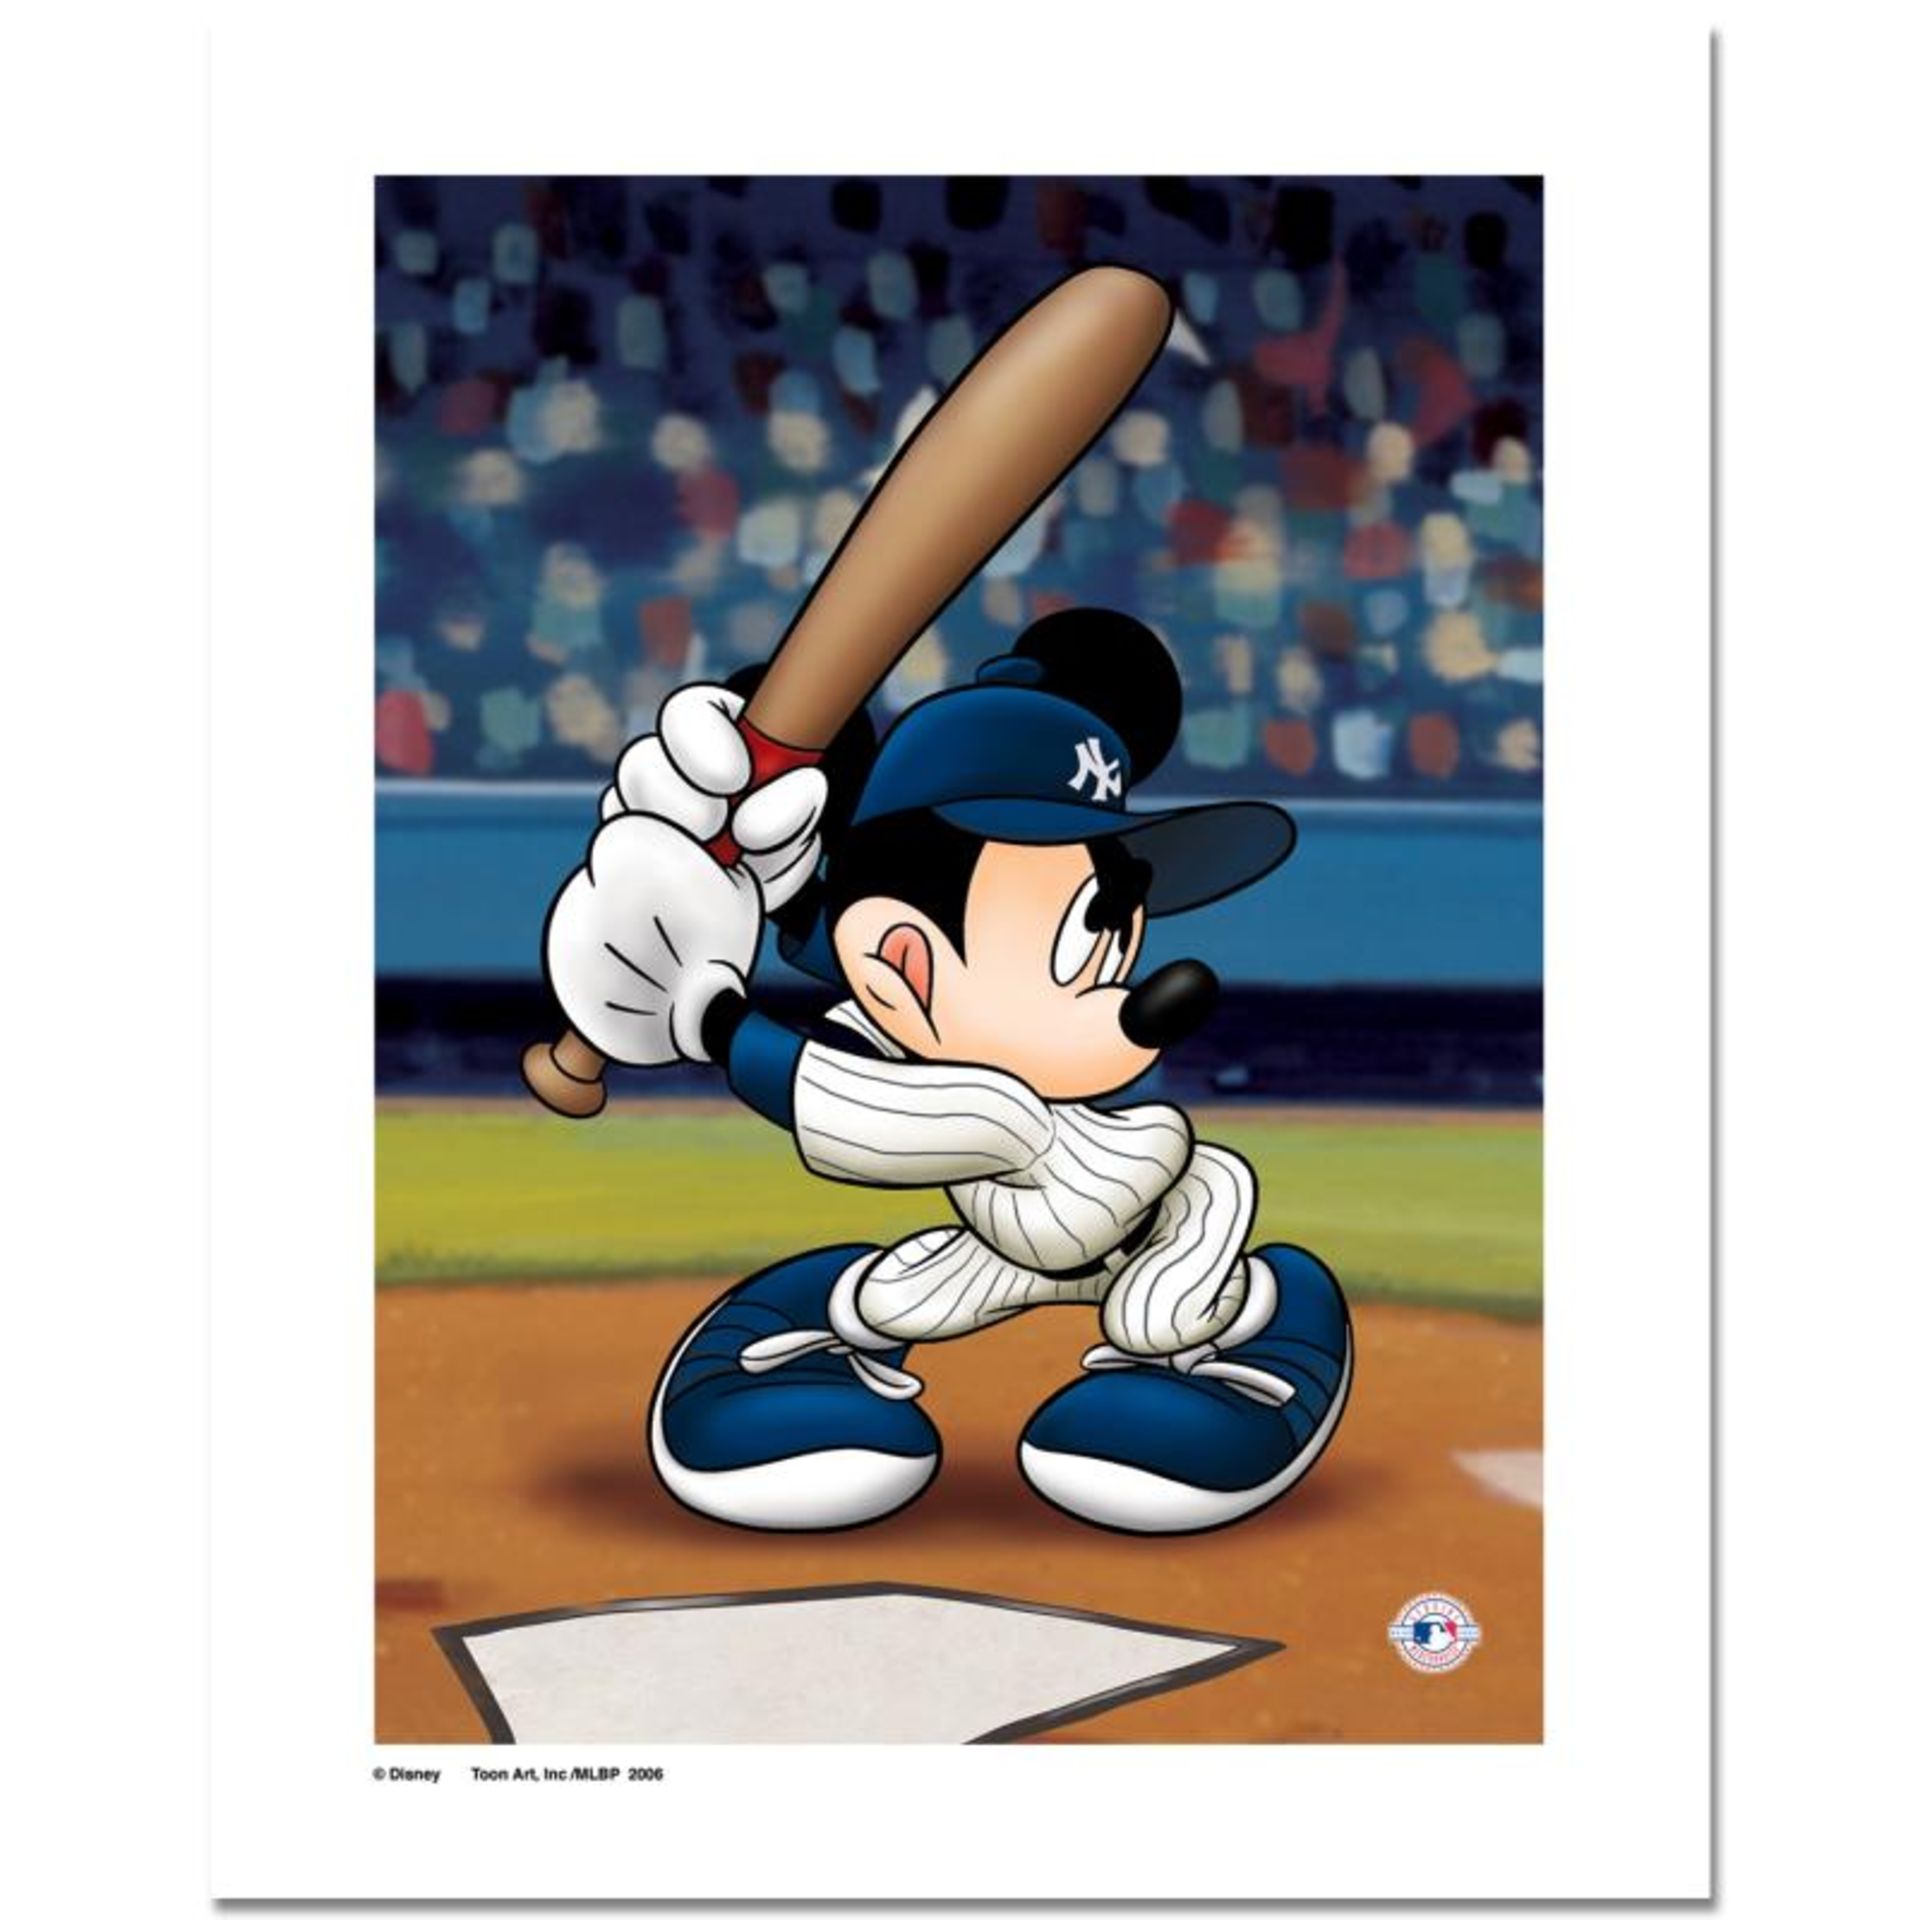 "Mickey at the Plate (Yankees)" Numbered Limited Edition Giclee licensed by Disn